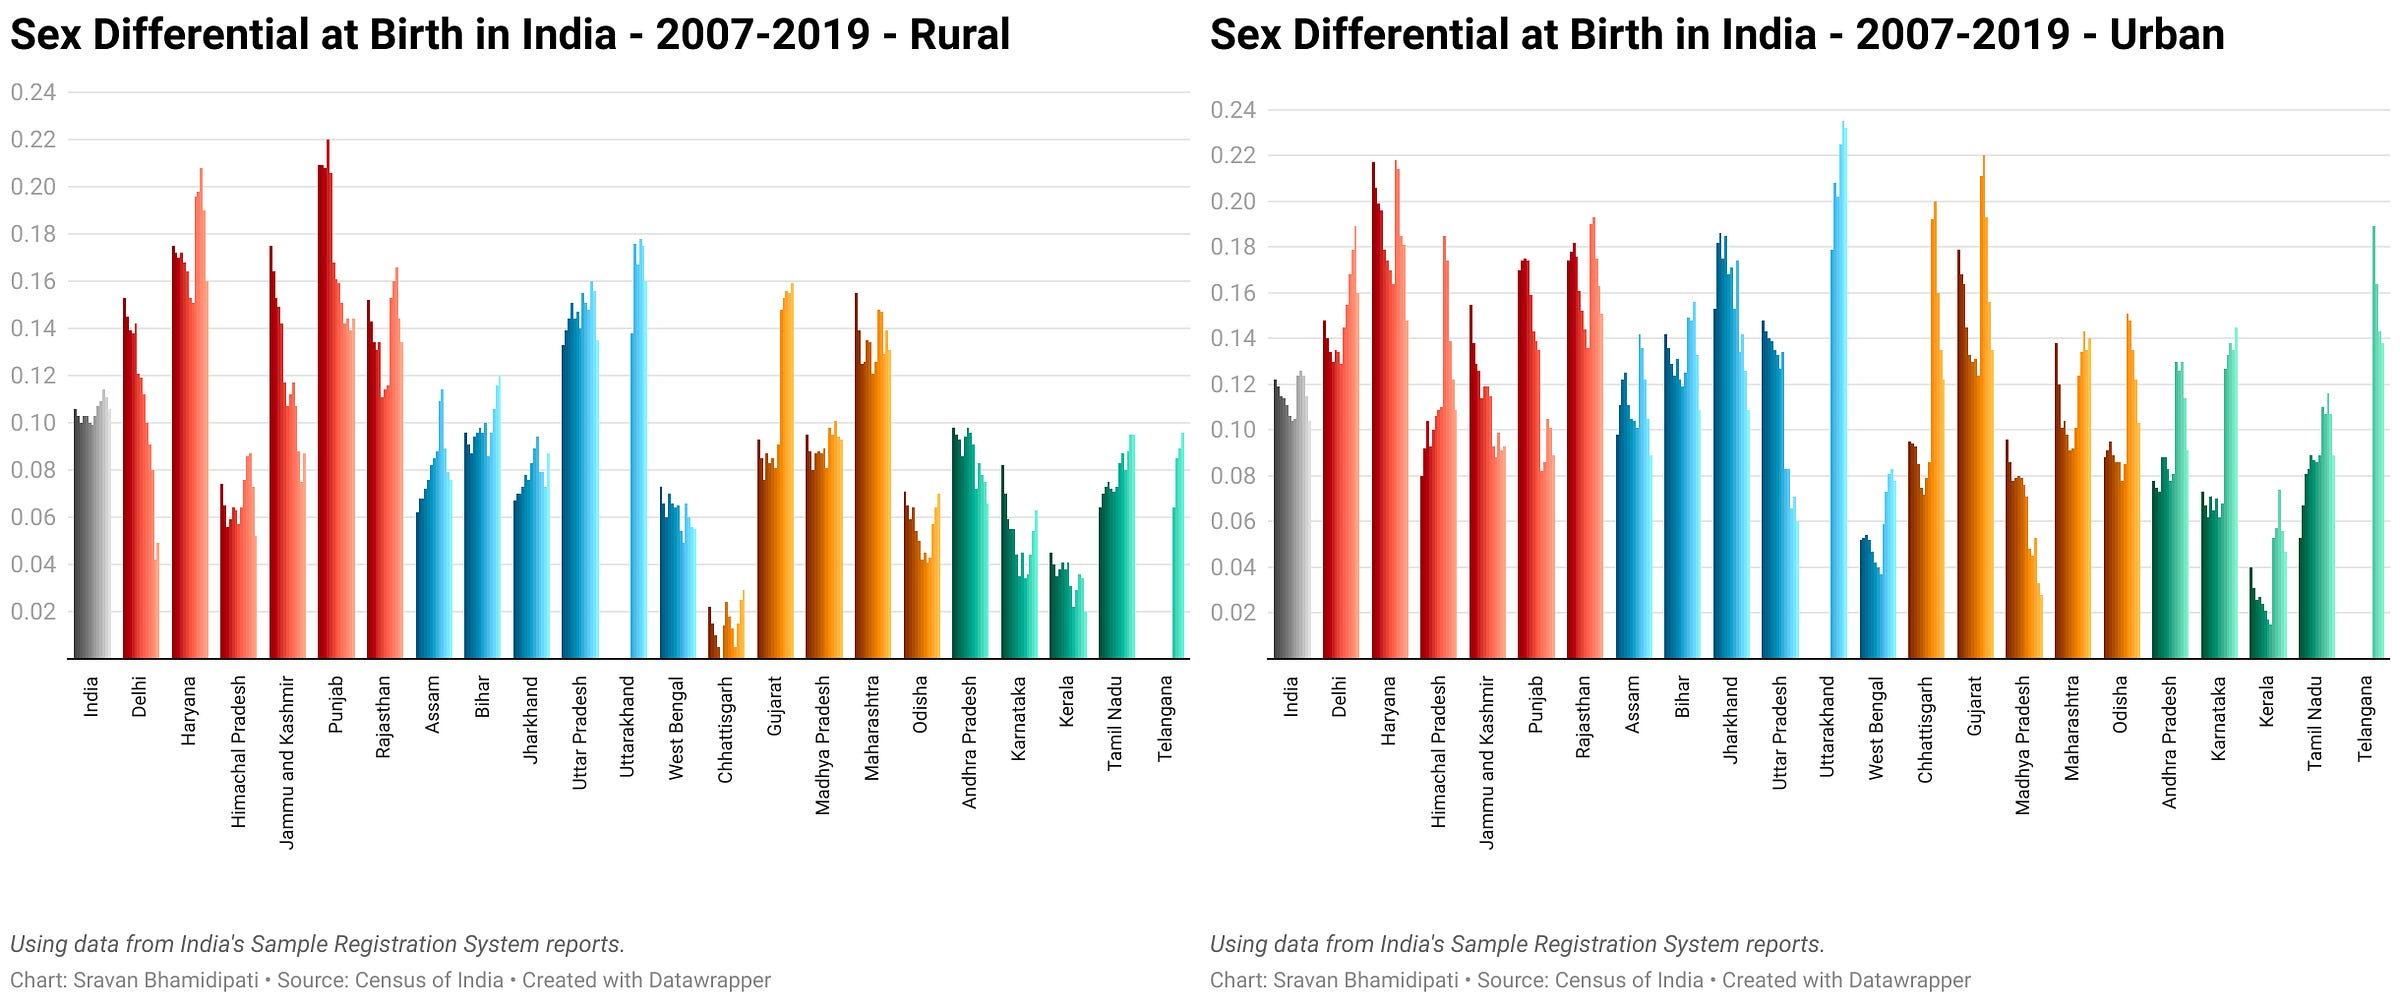 Statewise rural vs urban breakdown of sex differential at birth in India, from 2007 to 2019